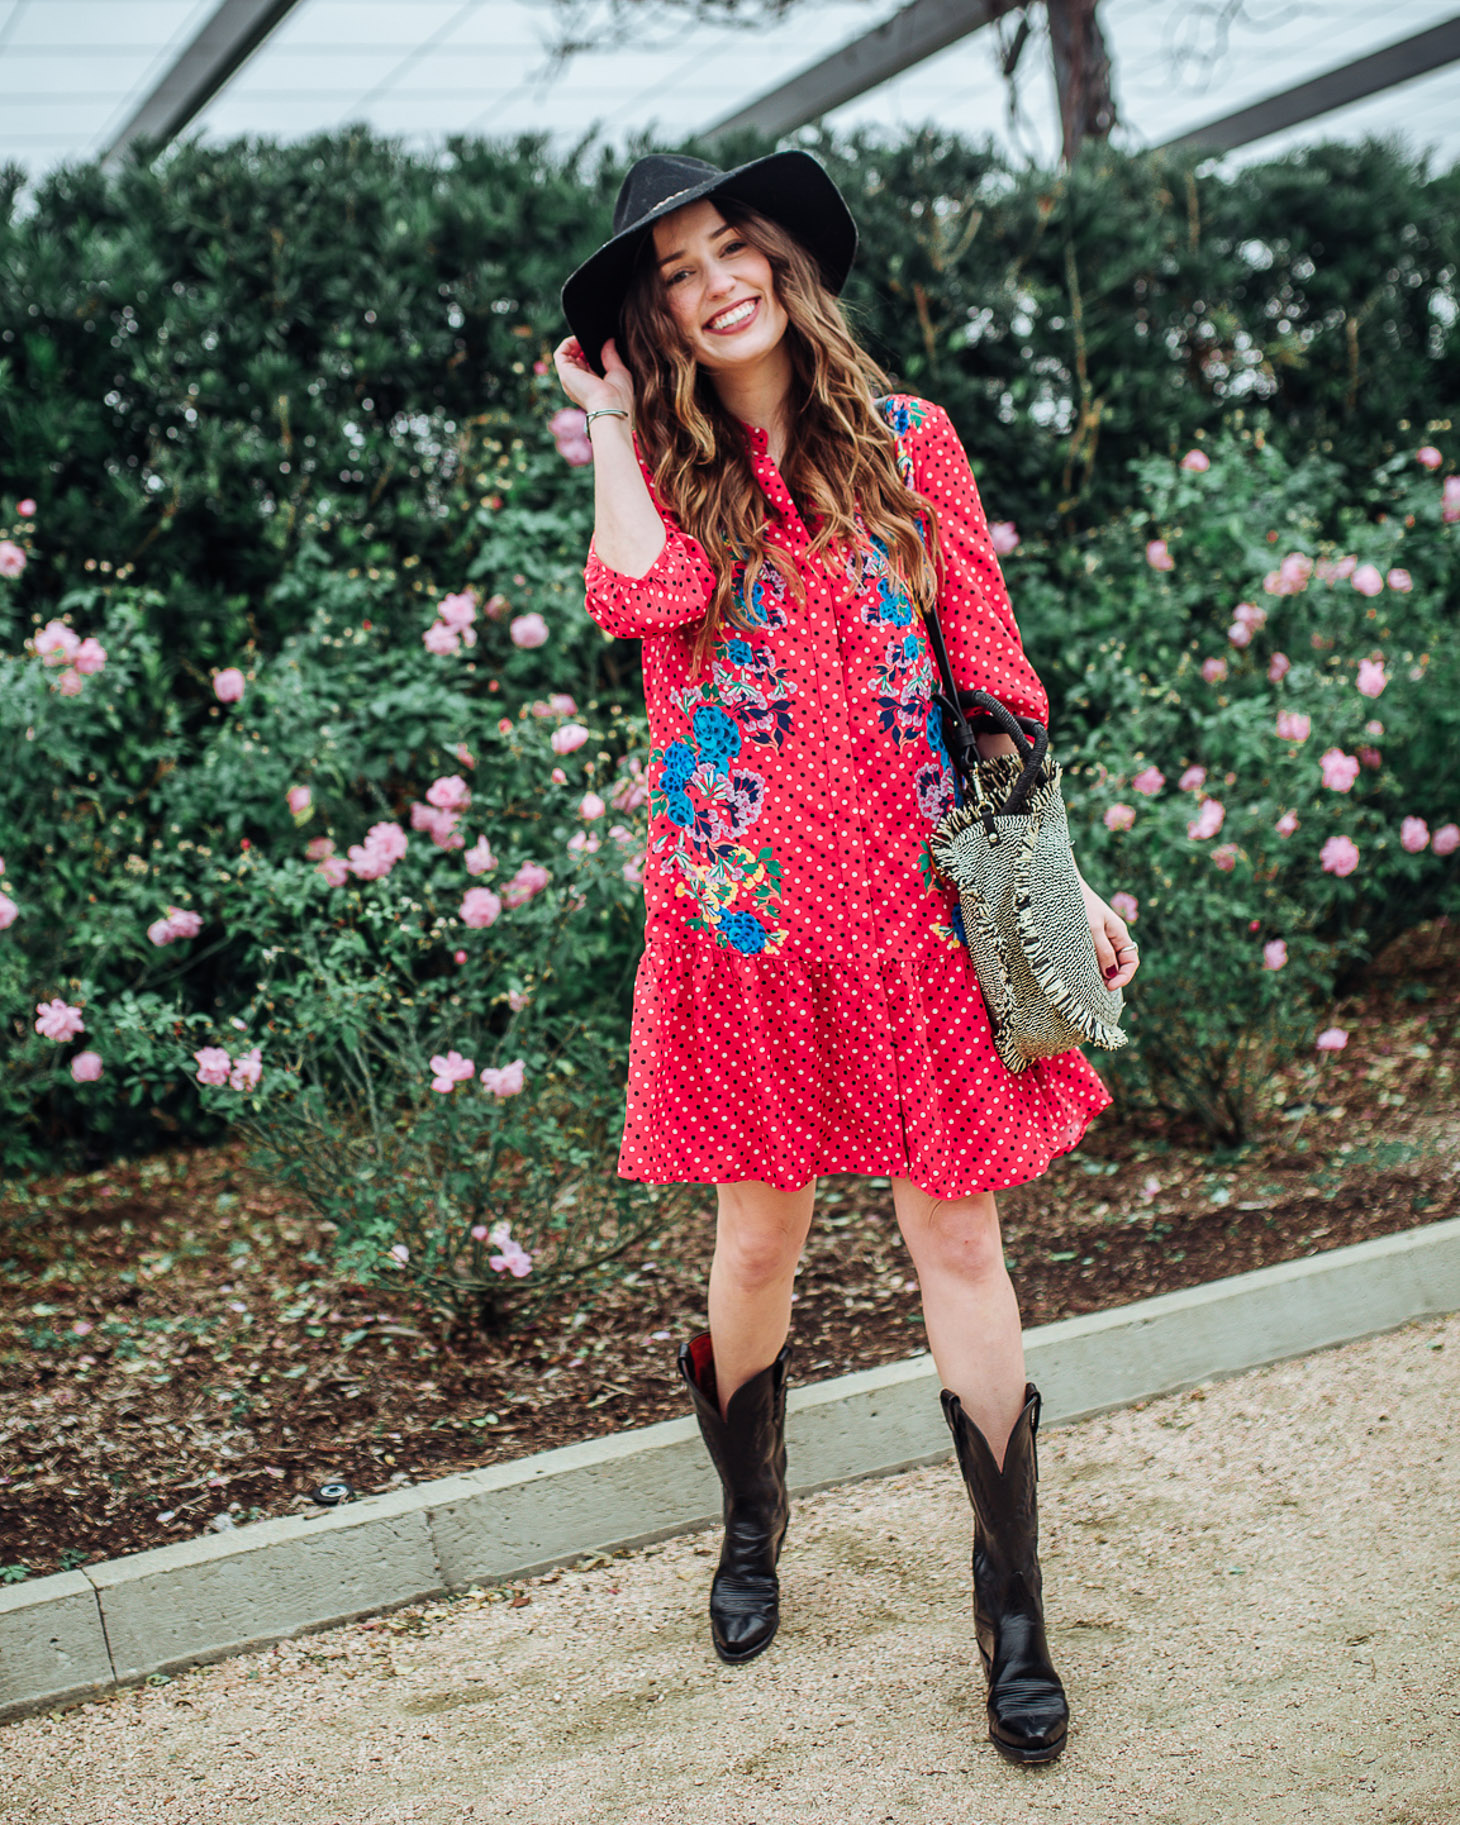 Cute Cowboy Boots roundup featured by top Houston fashion blog, Lone Star Looking Glass: image of a woman wearing Lucchese cowboy boots available at Zappos, a SALONI floral dress, Nordstrom Panama hat